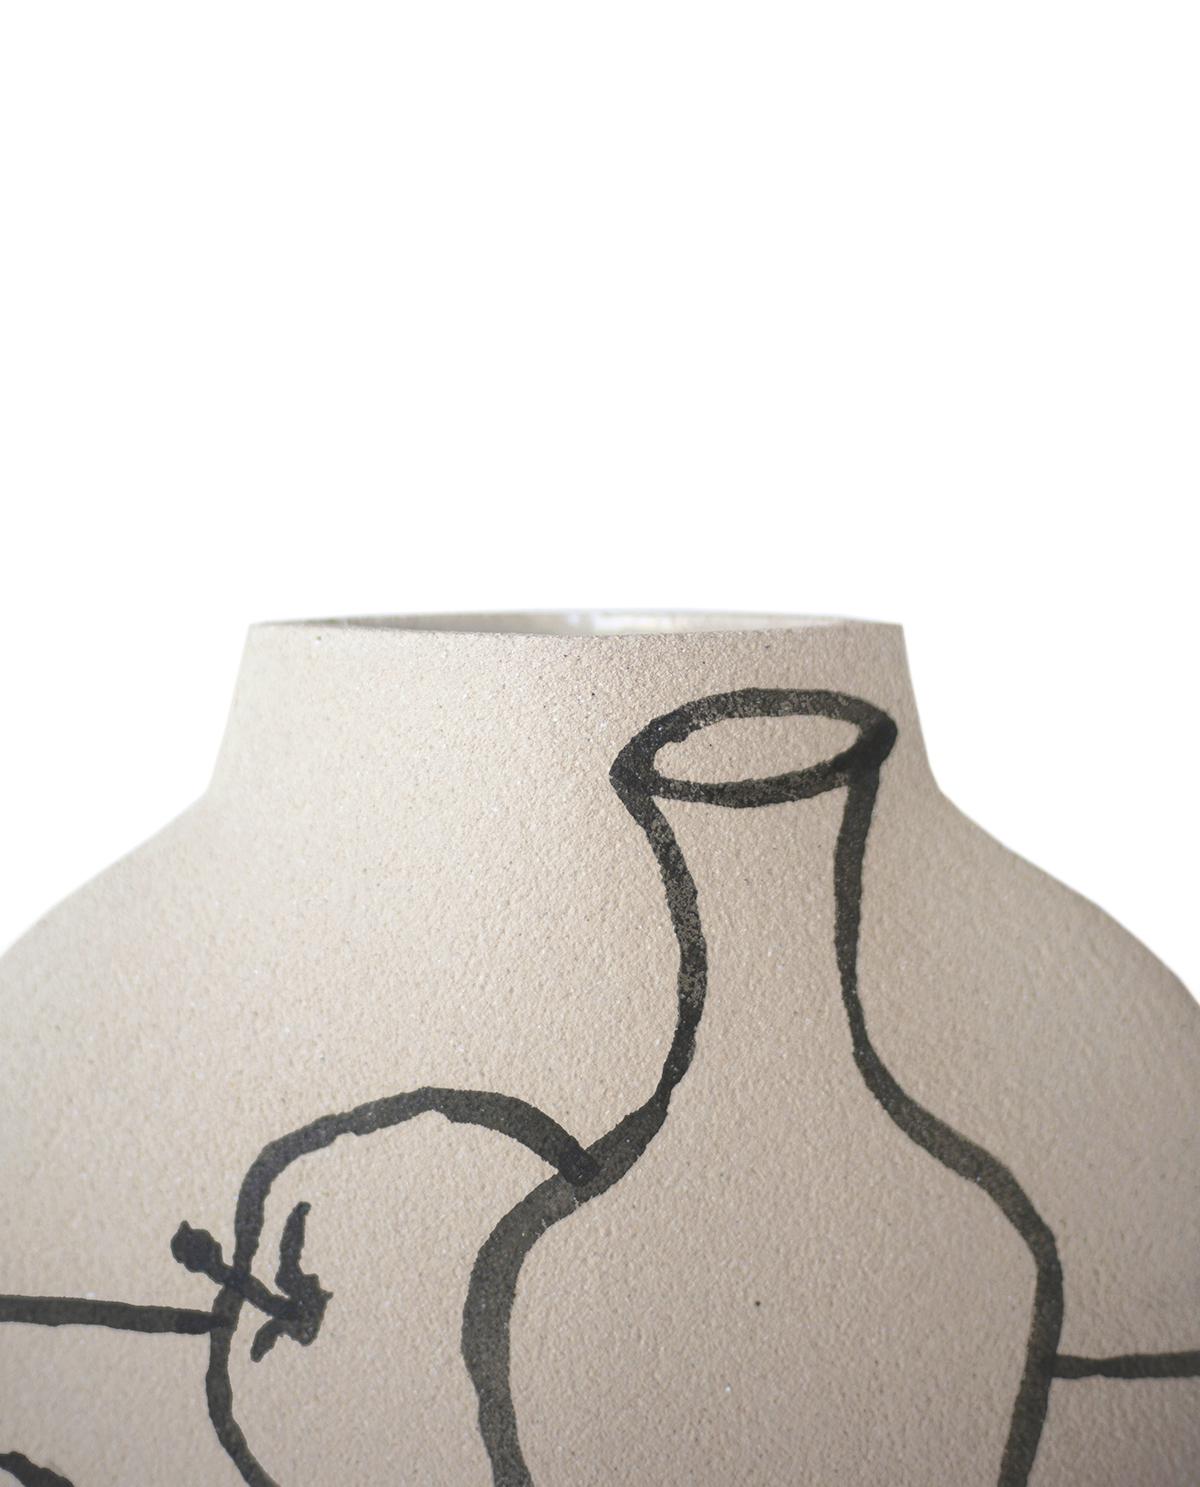 Minimalist 21st Century 'Still Life' Vase in White Ceramic, Handcrafted in France For Sale